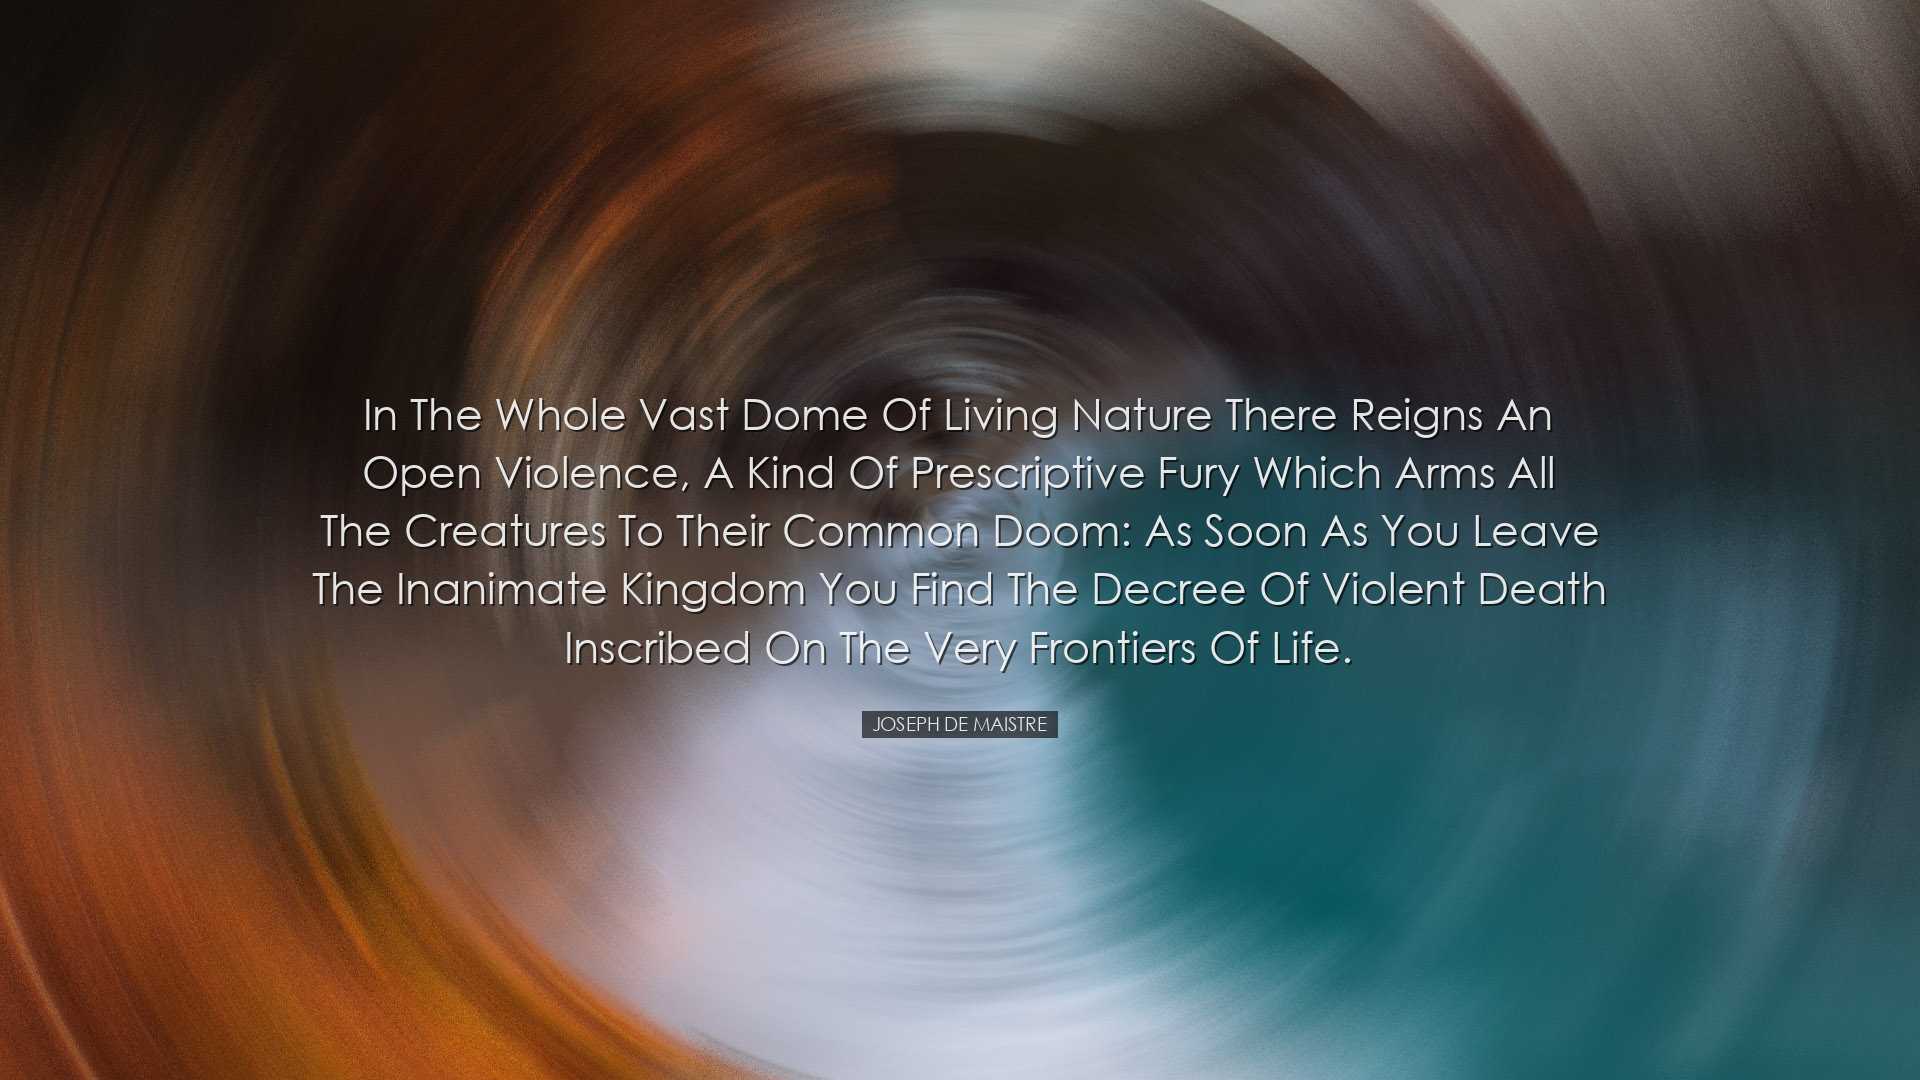 In the whole vast dome of living nature there reigns an open viole